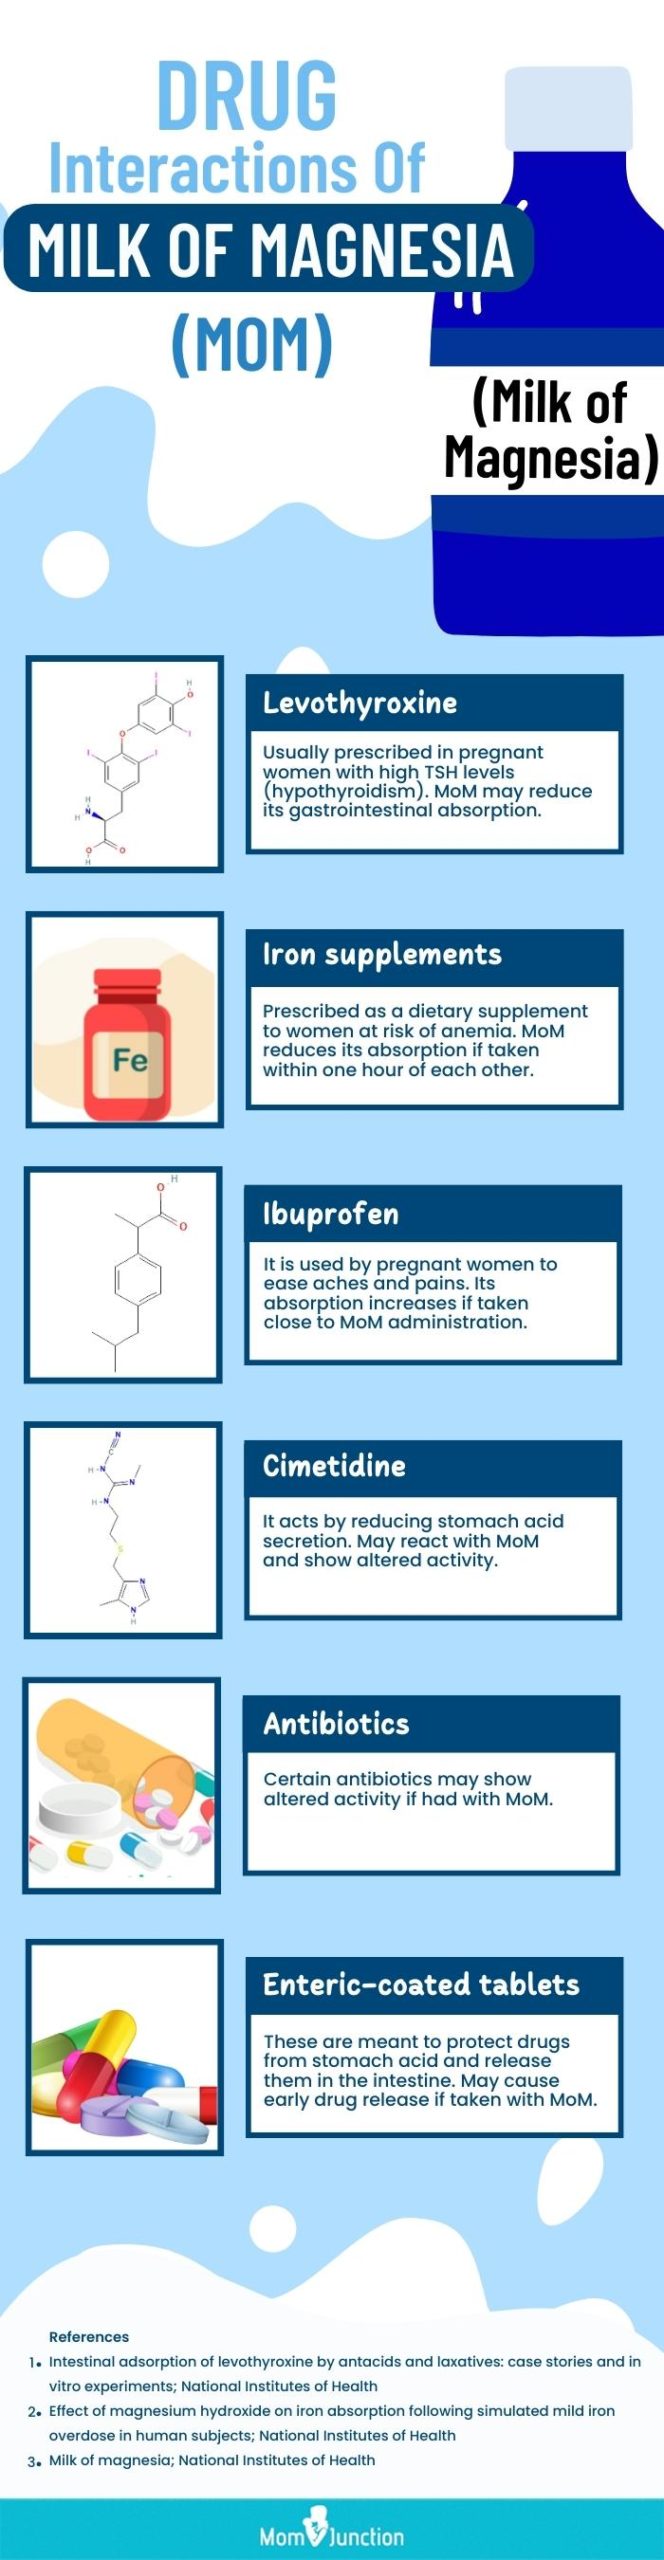 drug interactions of milk of magnesia (MoM)[infographic]